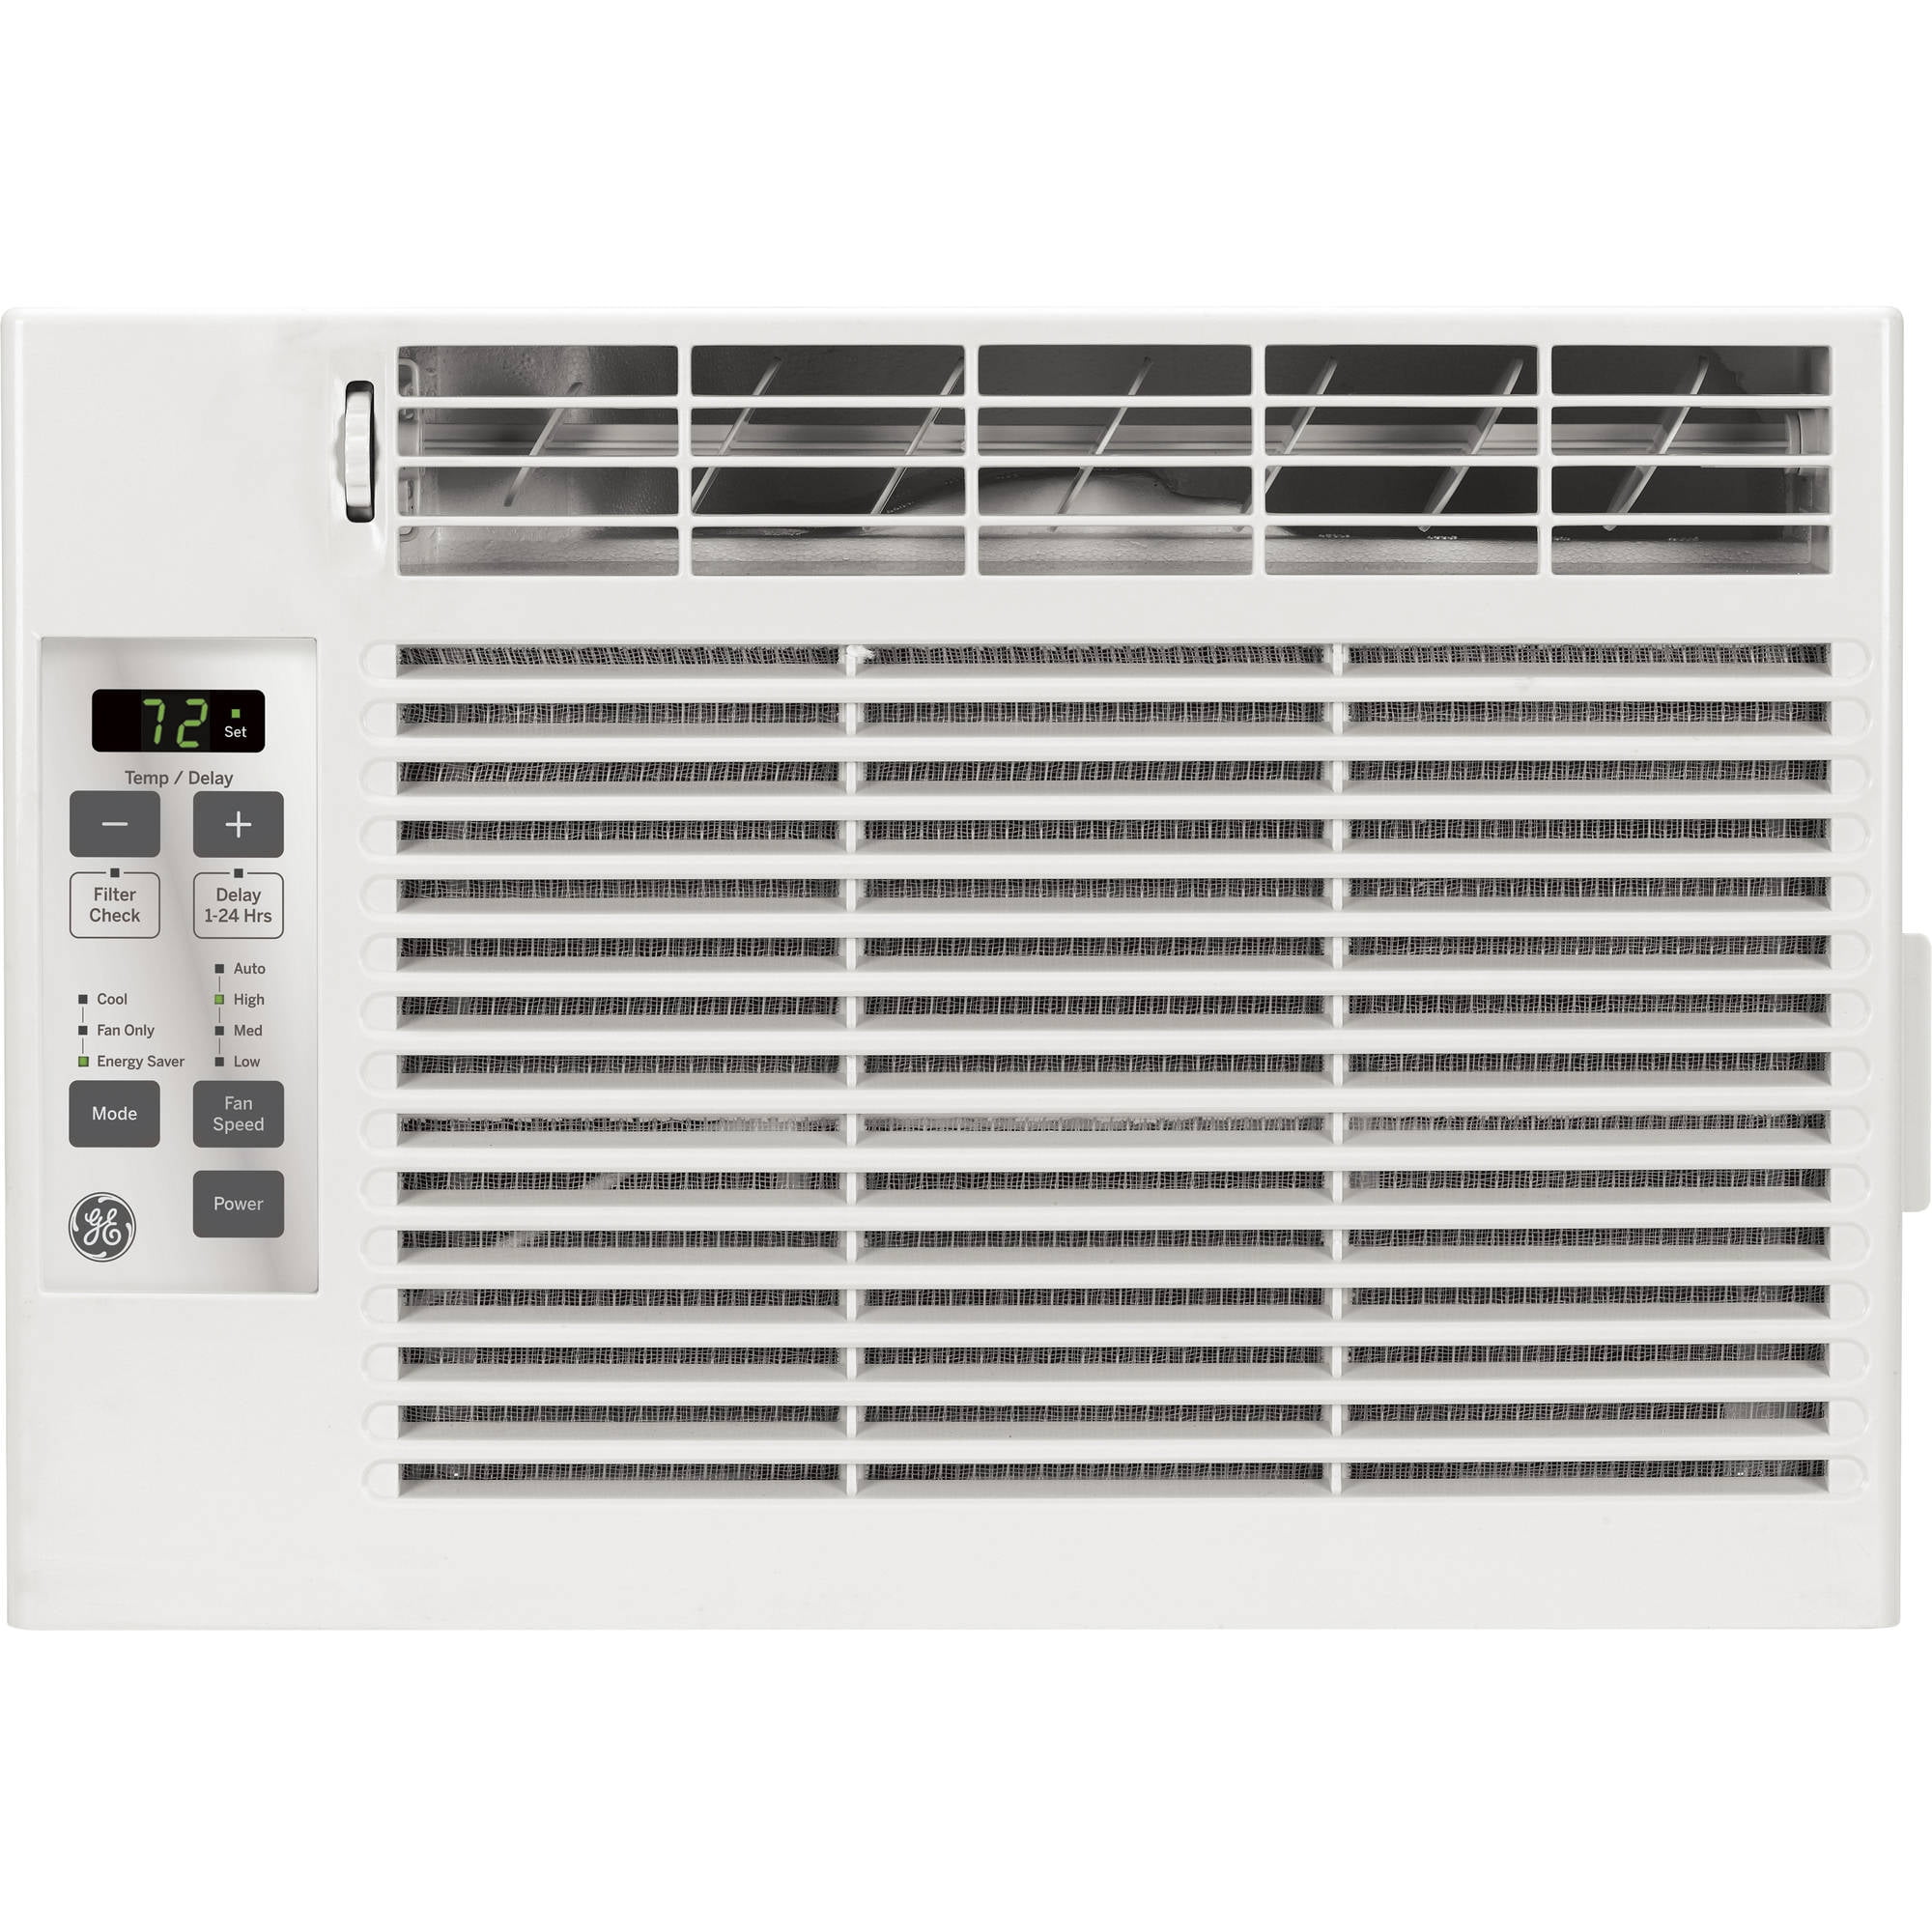 How do you troubleshoot problems with a GE air conditioner?